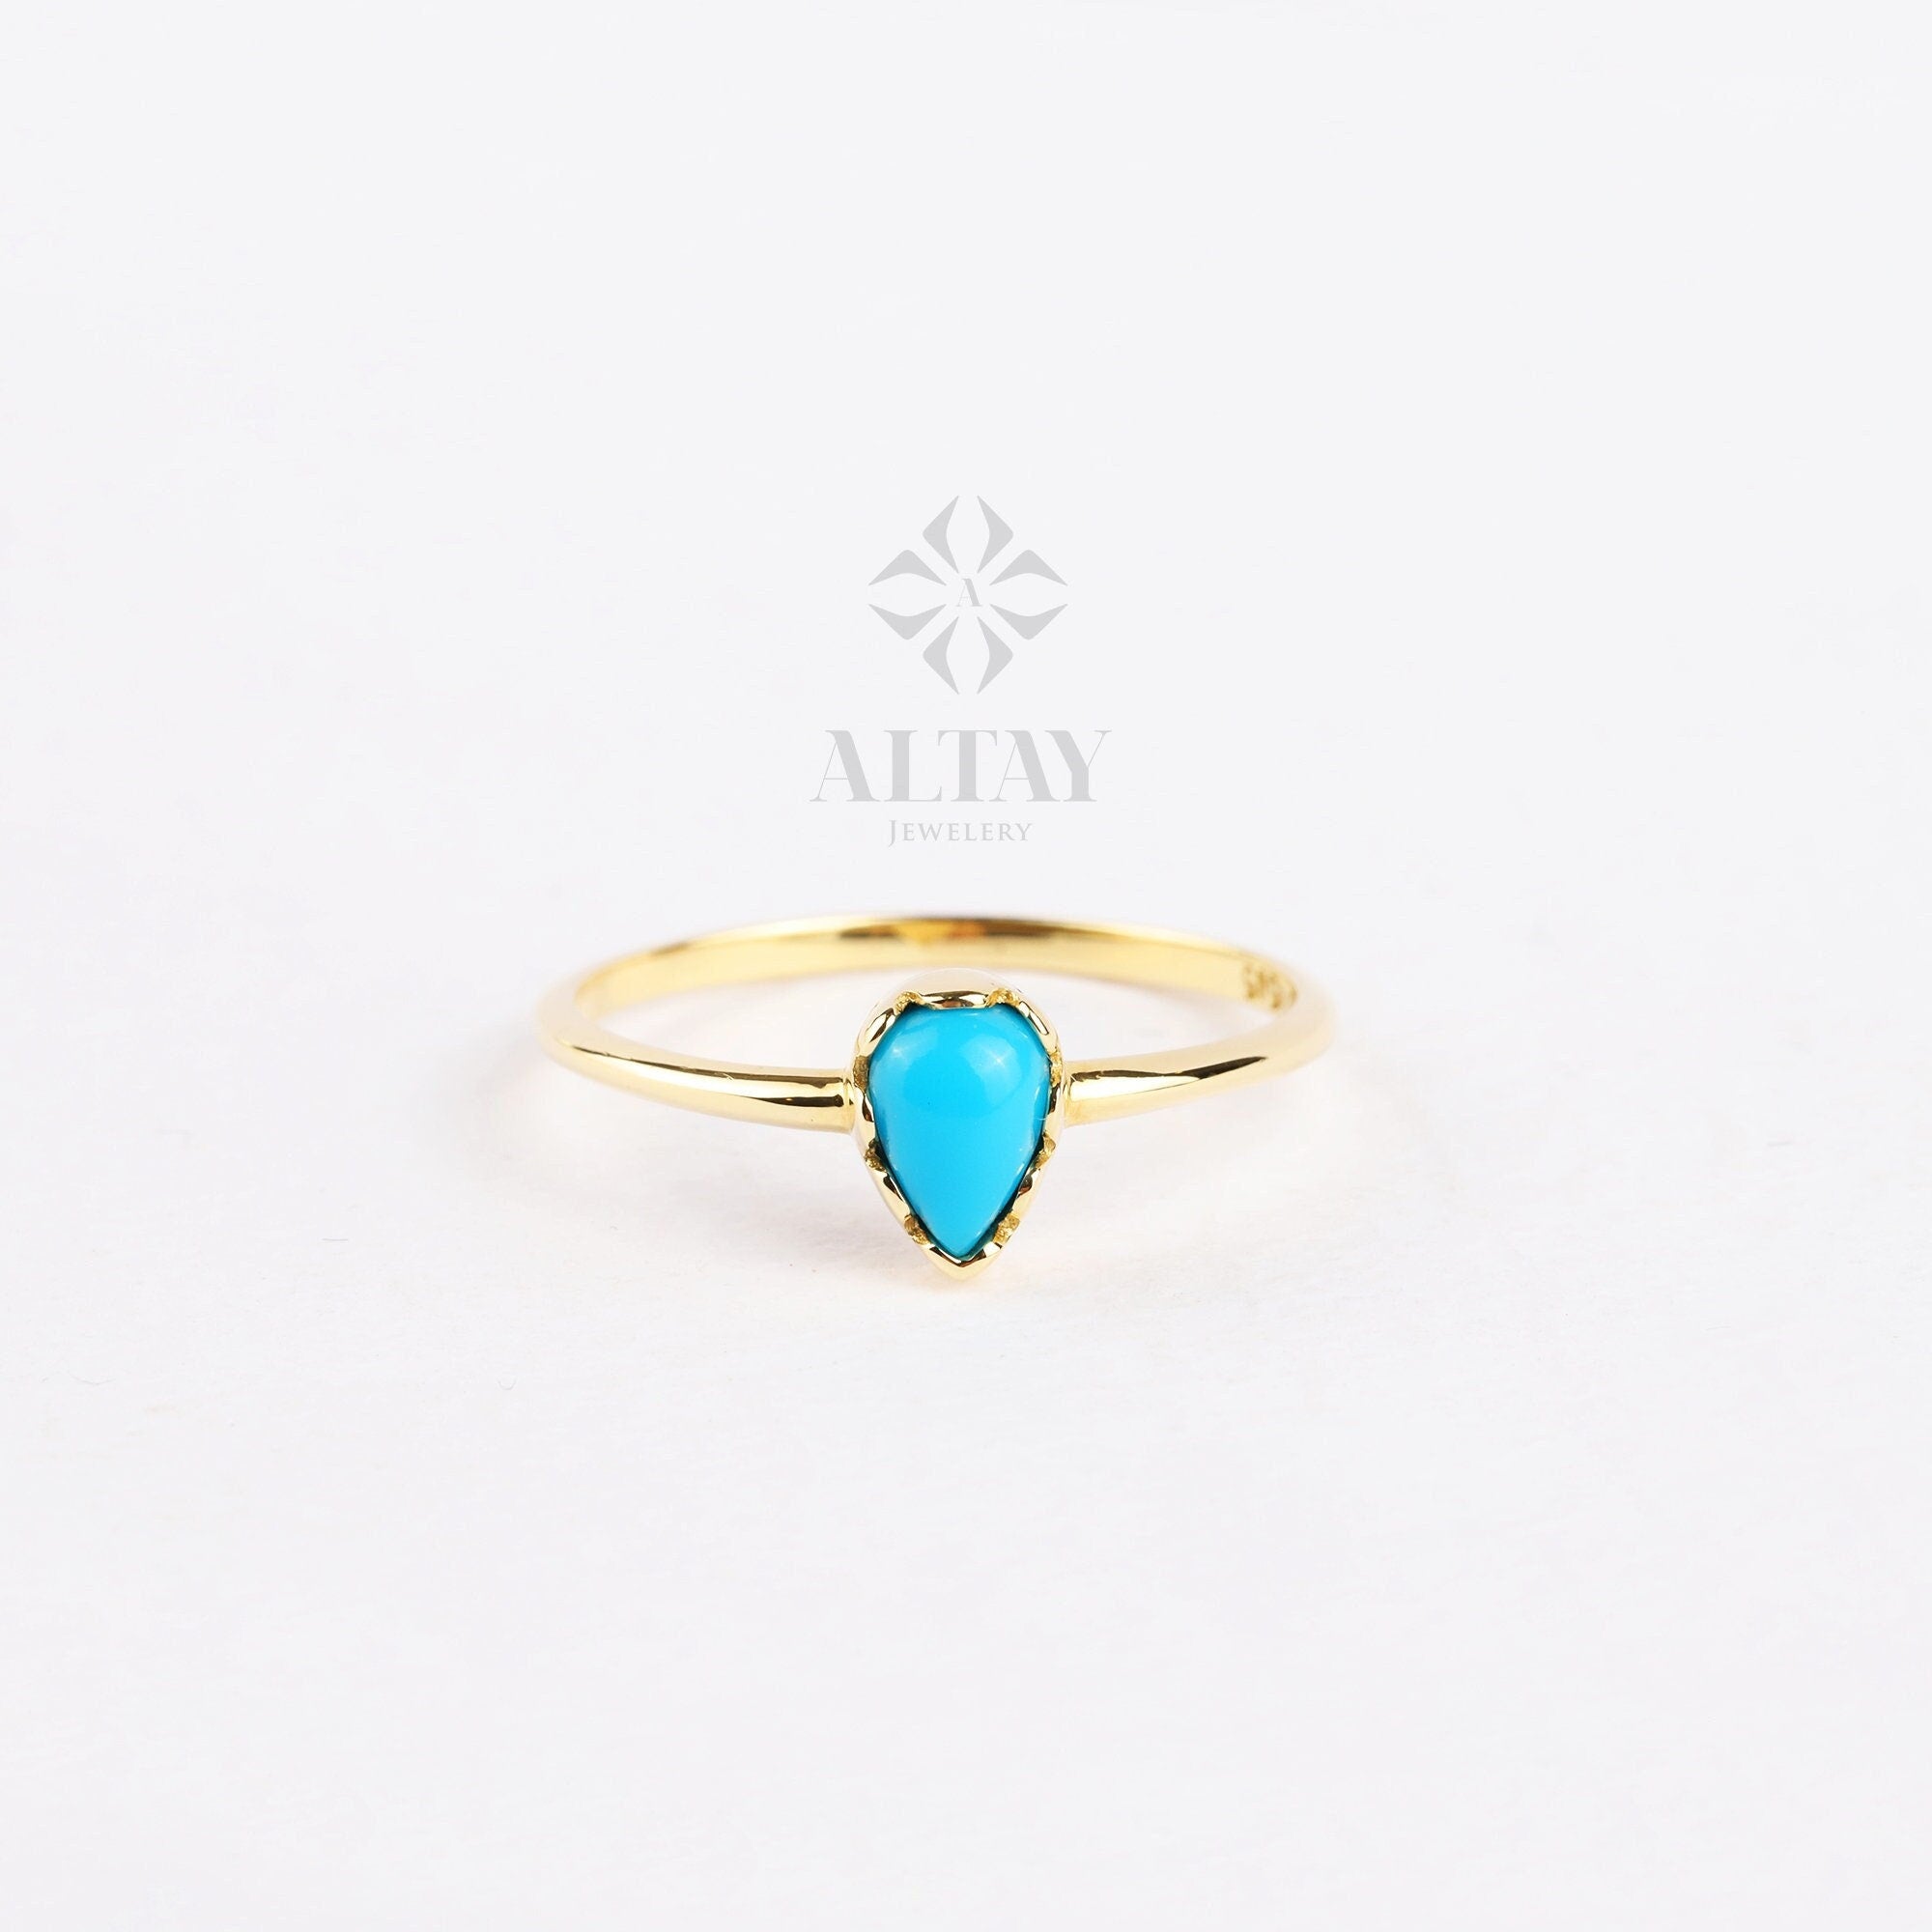 14K Solid Gold Drop Ring, Turquoise Pear Stone Ring, Dainty Knuckle Band, Stackable Ring, Gift For Her, Minimal Ring, Colorful Stone Ring